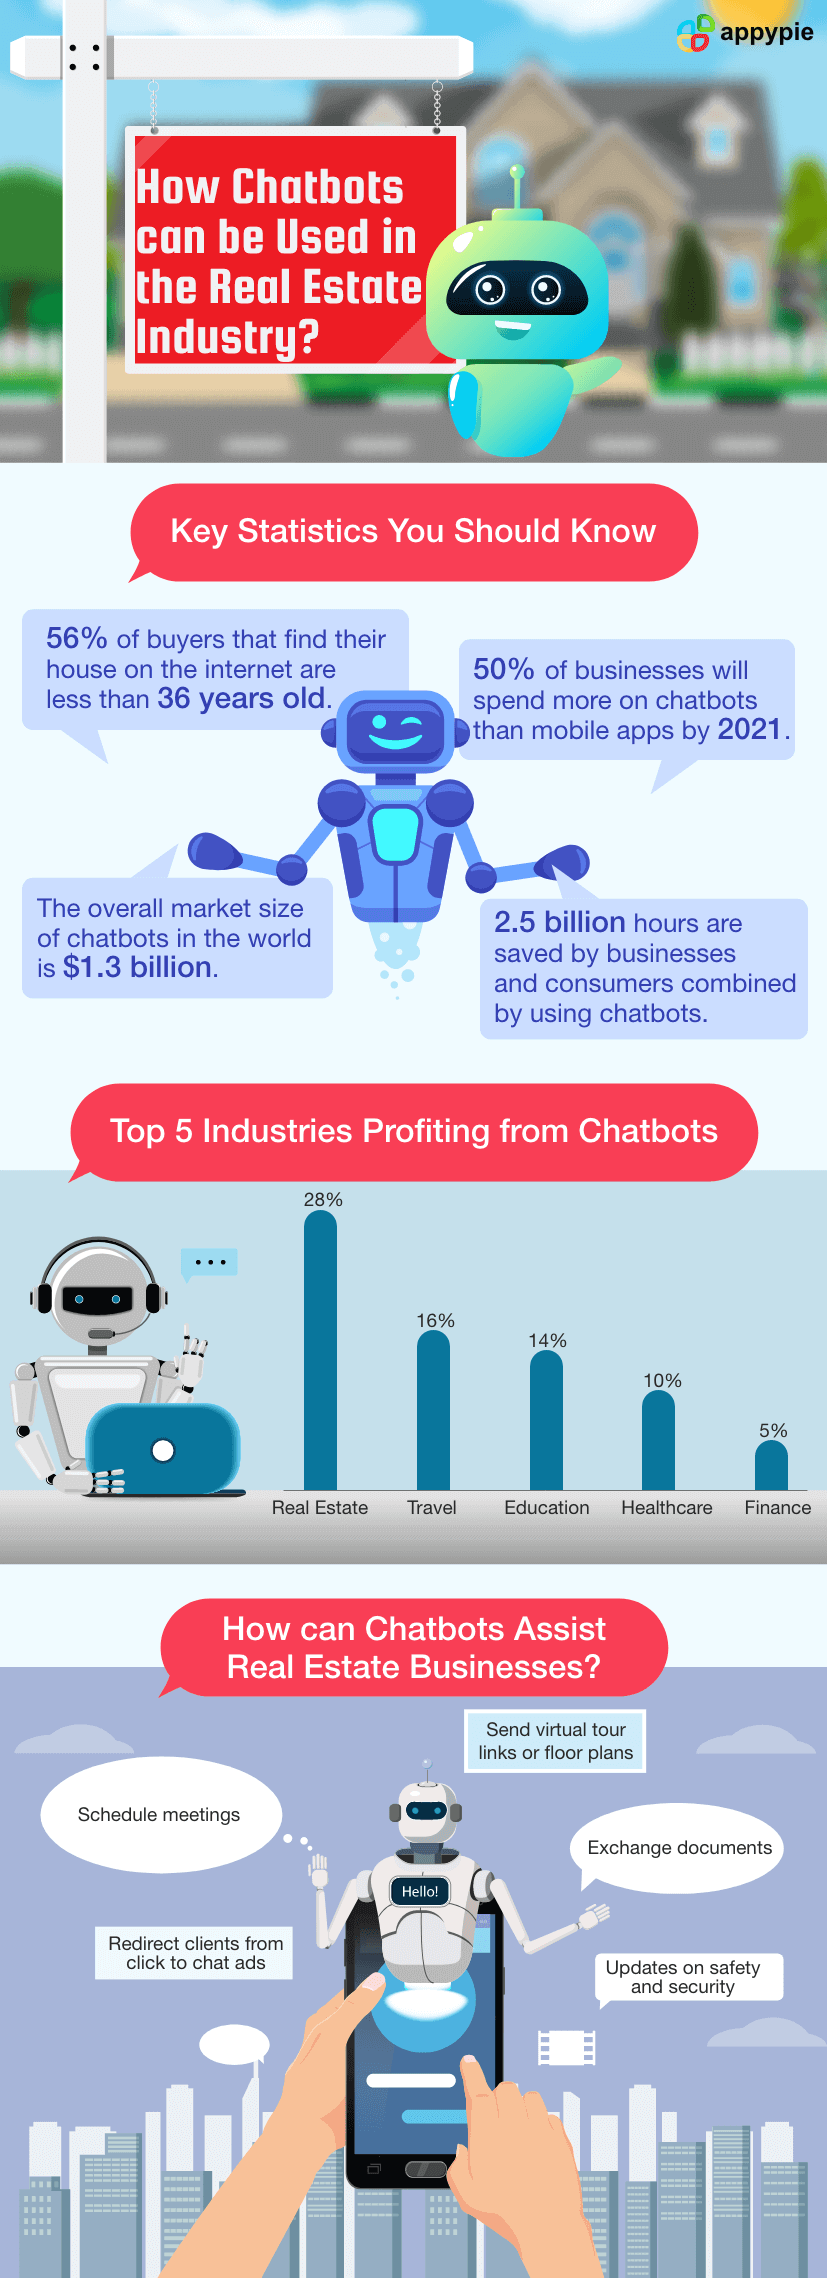 How Chatbots can be Used in the Real Estate Industry - Appy Pie